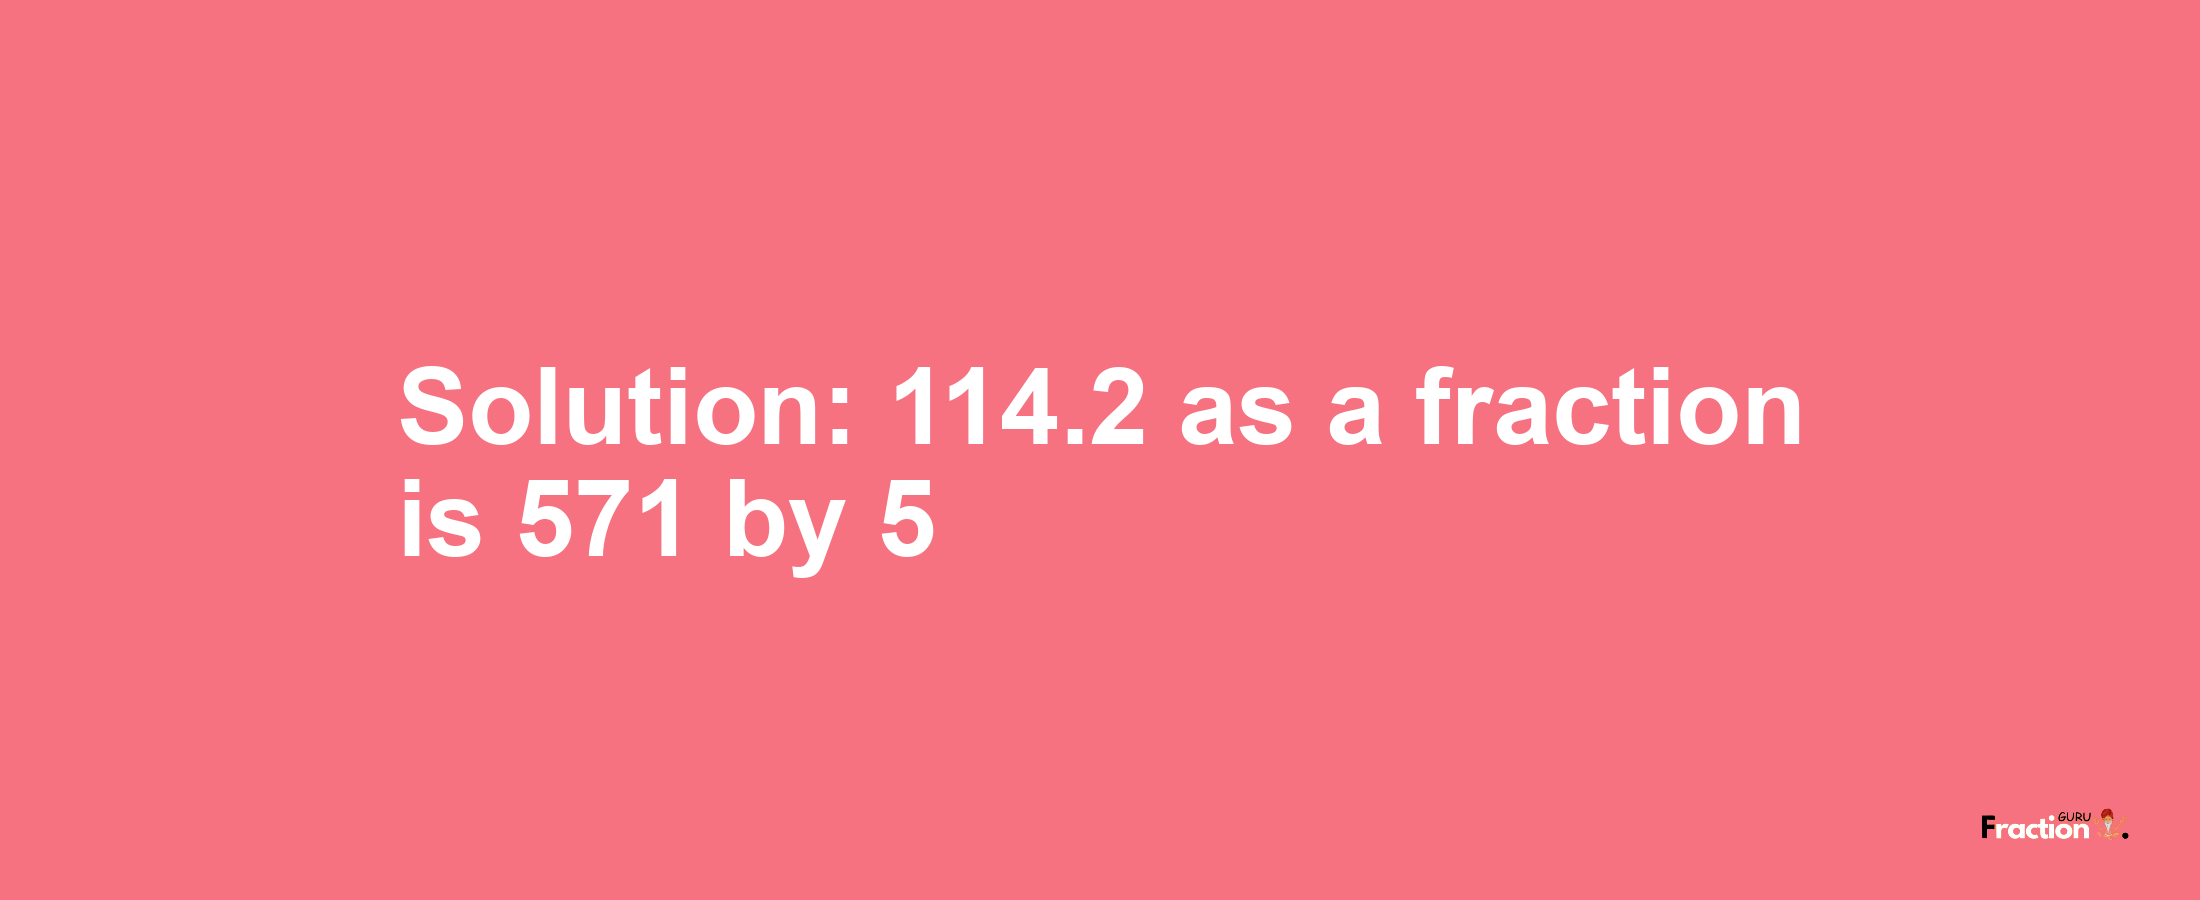 Solution:114.2 as a fraction is 571/5